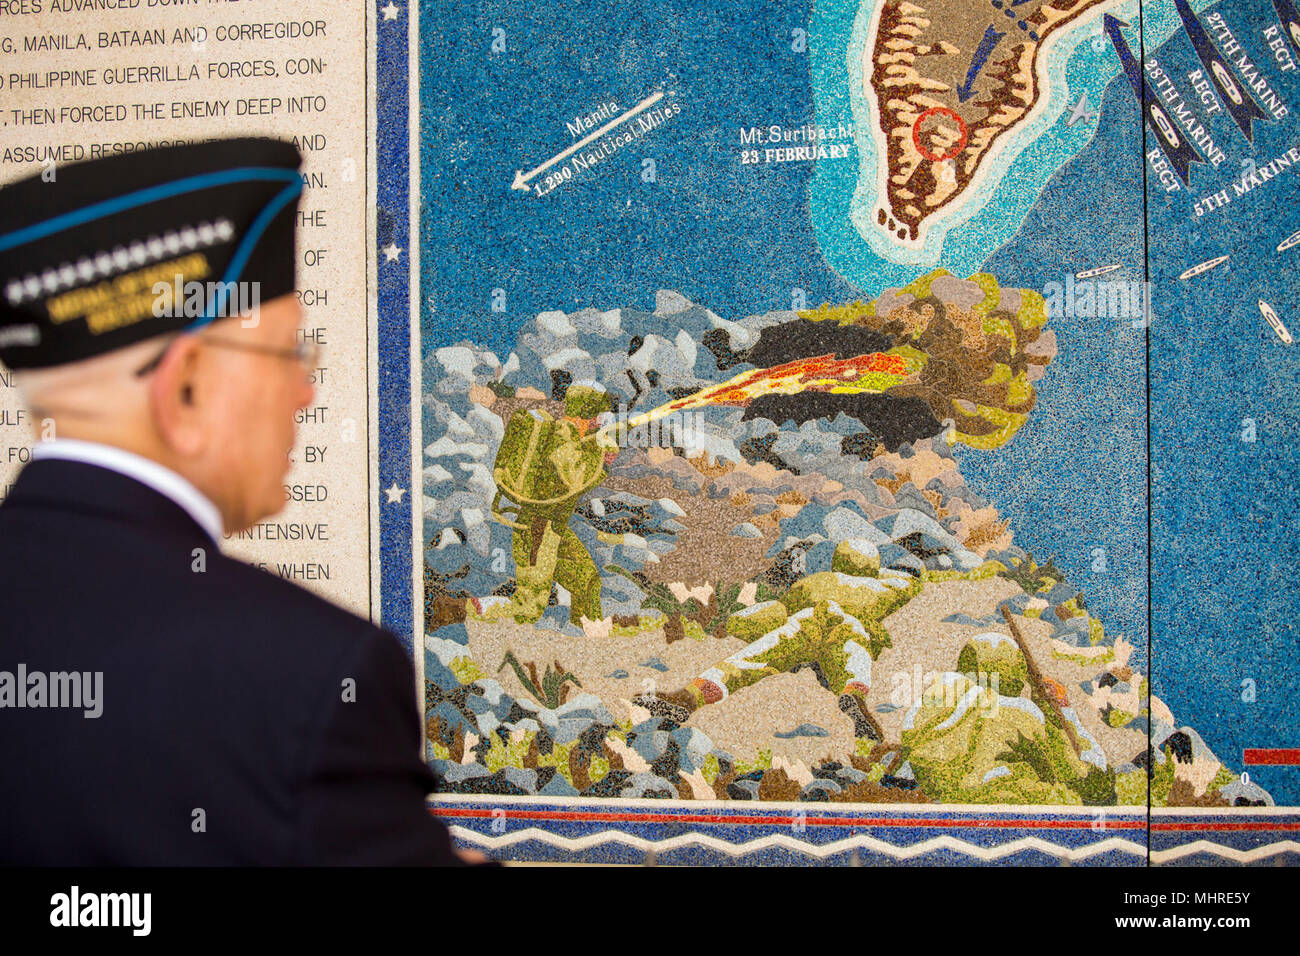 U.S. Marine Corps Chief Warrant Officer 4 Hershel 'Woody' Williams (Ret.) observes a portion of a mosaic map of the Battle of Iwo Jima  which features a Marine using a flamethrower, National Memorial Cemetary of the Pacific, Honolulu HI, March 17, 2018. Williams traveled to Oahu to participate in various events and visit the graves of World War II veterans that made the ultimate sacrifice. (U.S. Marine Corps Stock Photo